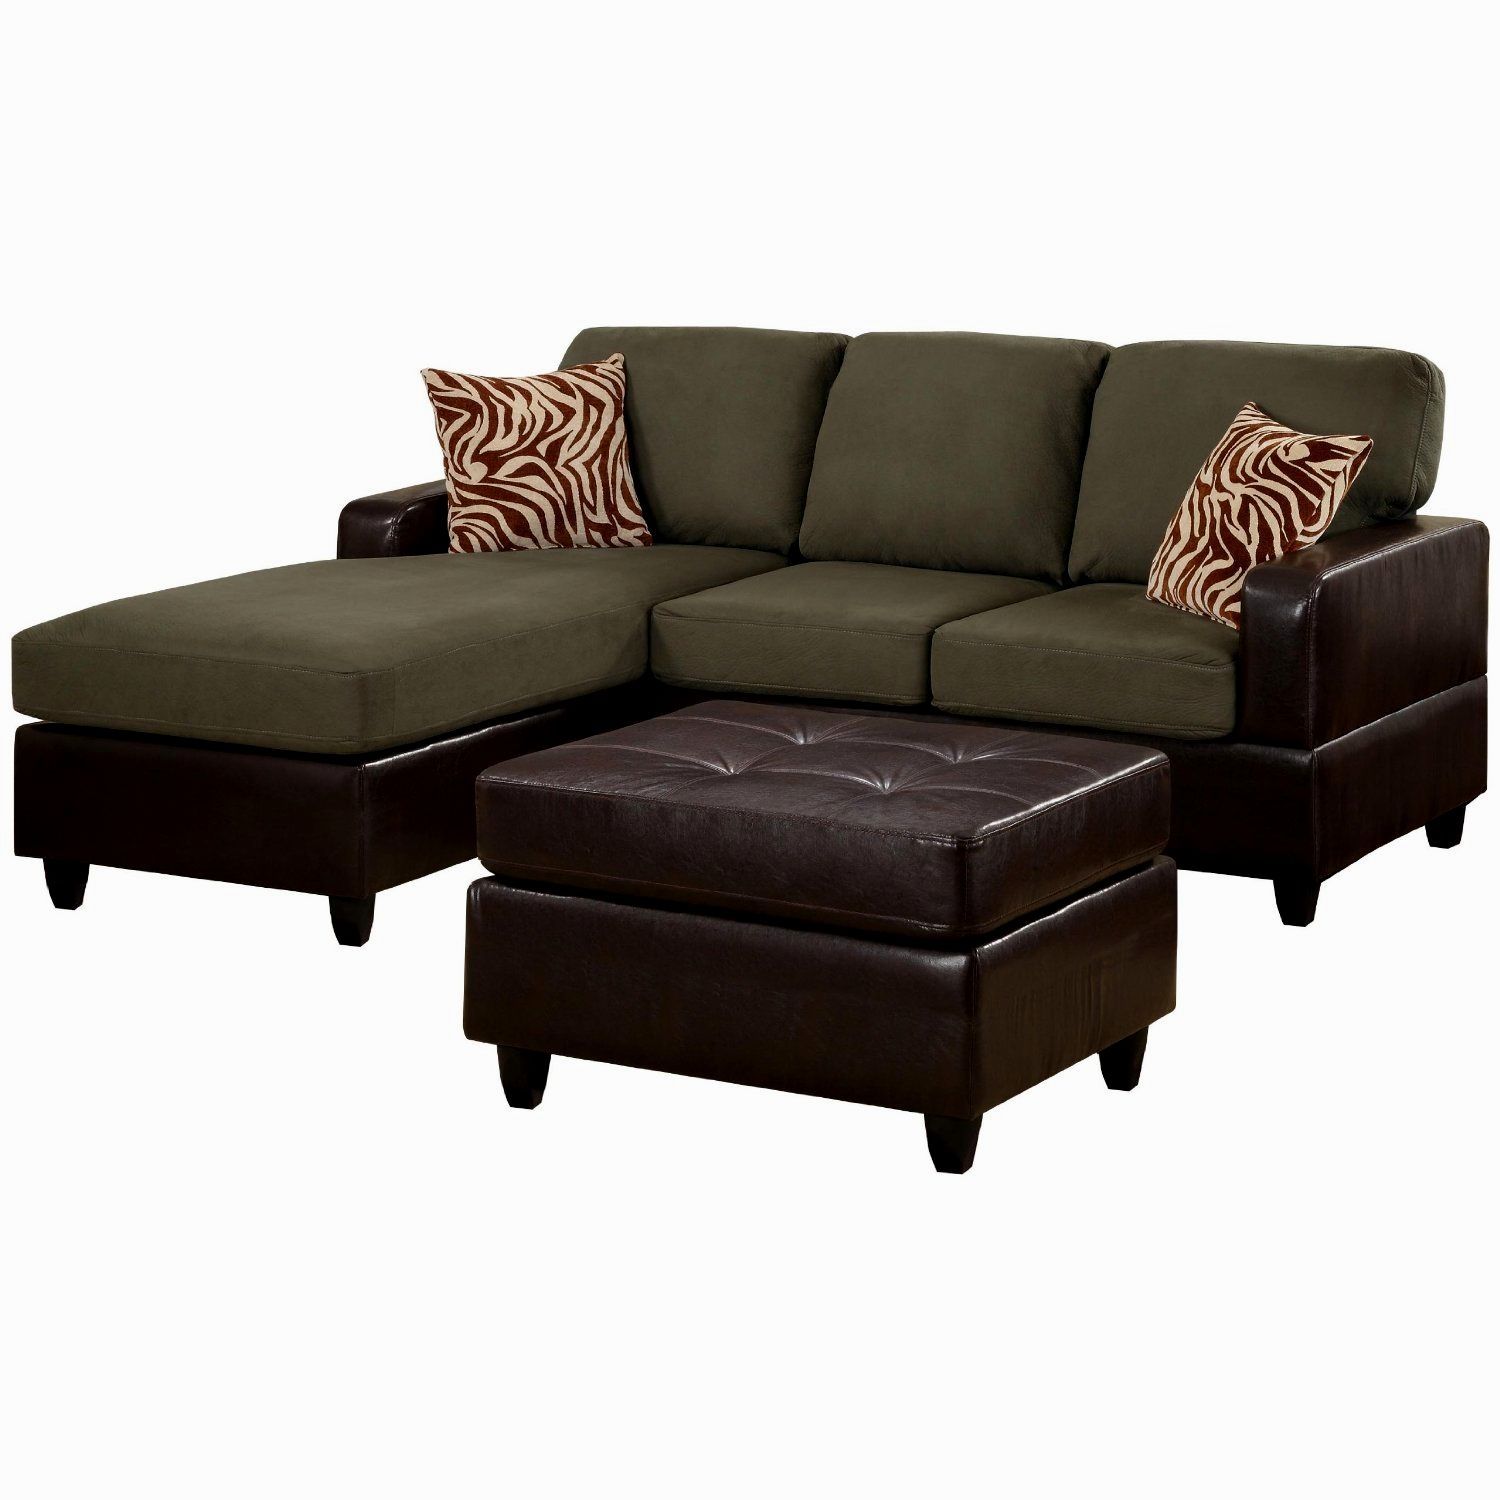 Microfiber Sectional Sofa With Ottoman – Ideas On Foter With Regard To Microfiber Sectional Corner Sofas (Gallery 17 of 20)